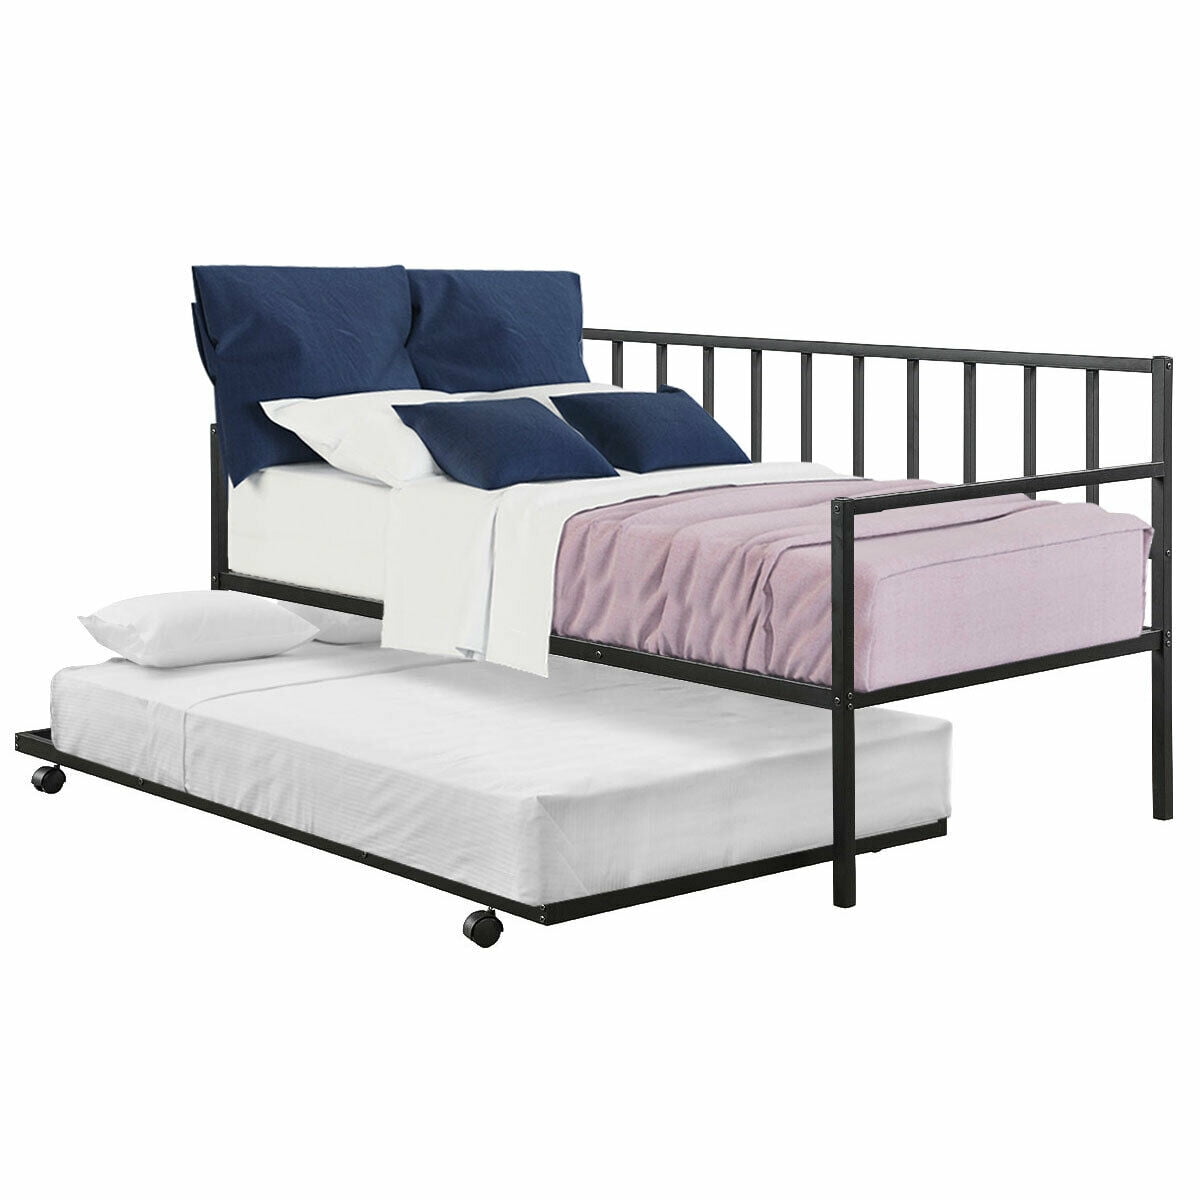 Gymax Twin Trundle Daybed W 4 Casters, Can A Twin Trundle Fit Under Queen Bed